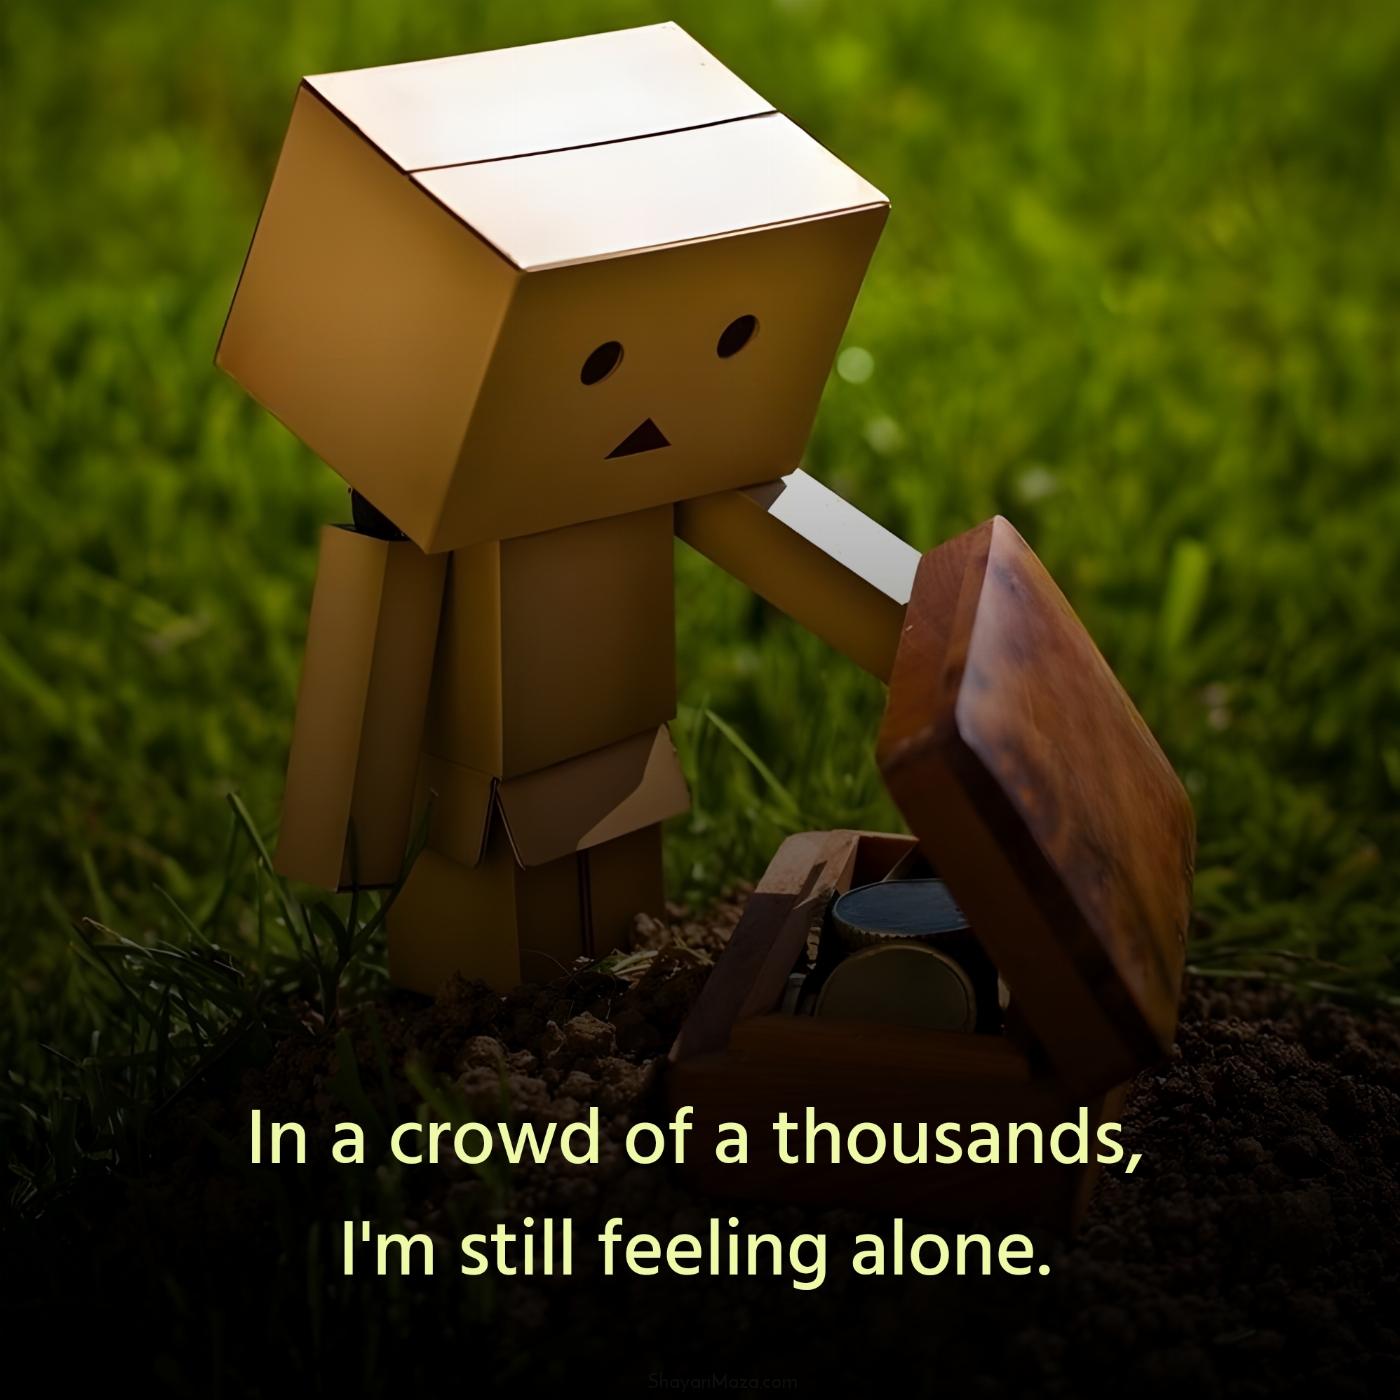 In a crowd of a thousands I'm still feeling alone